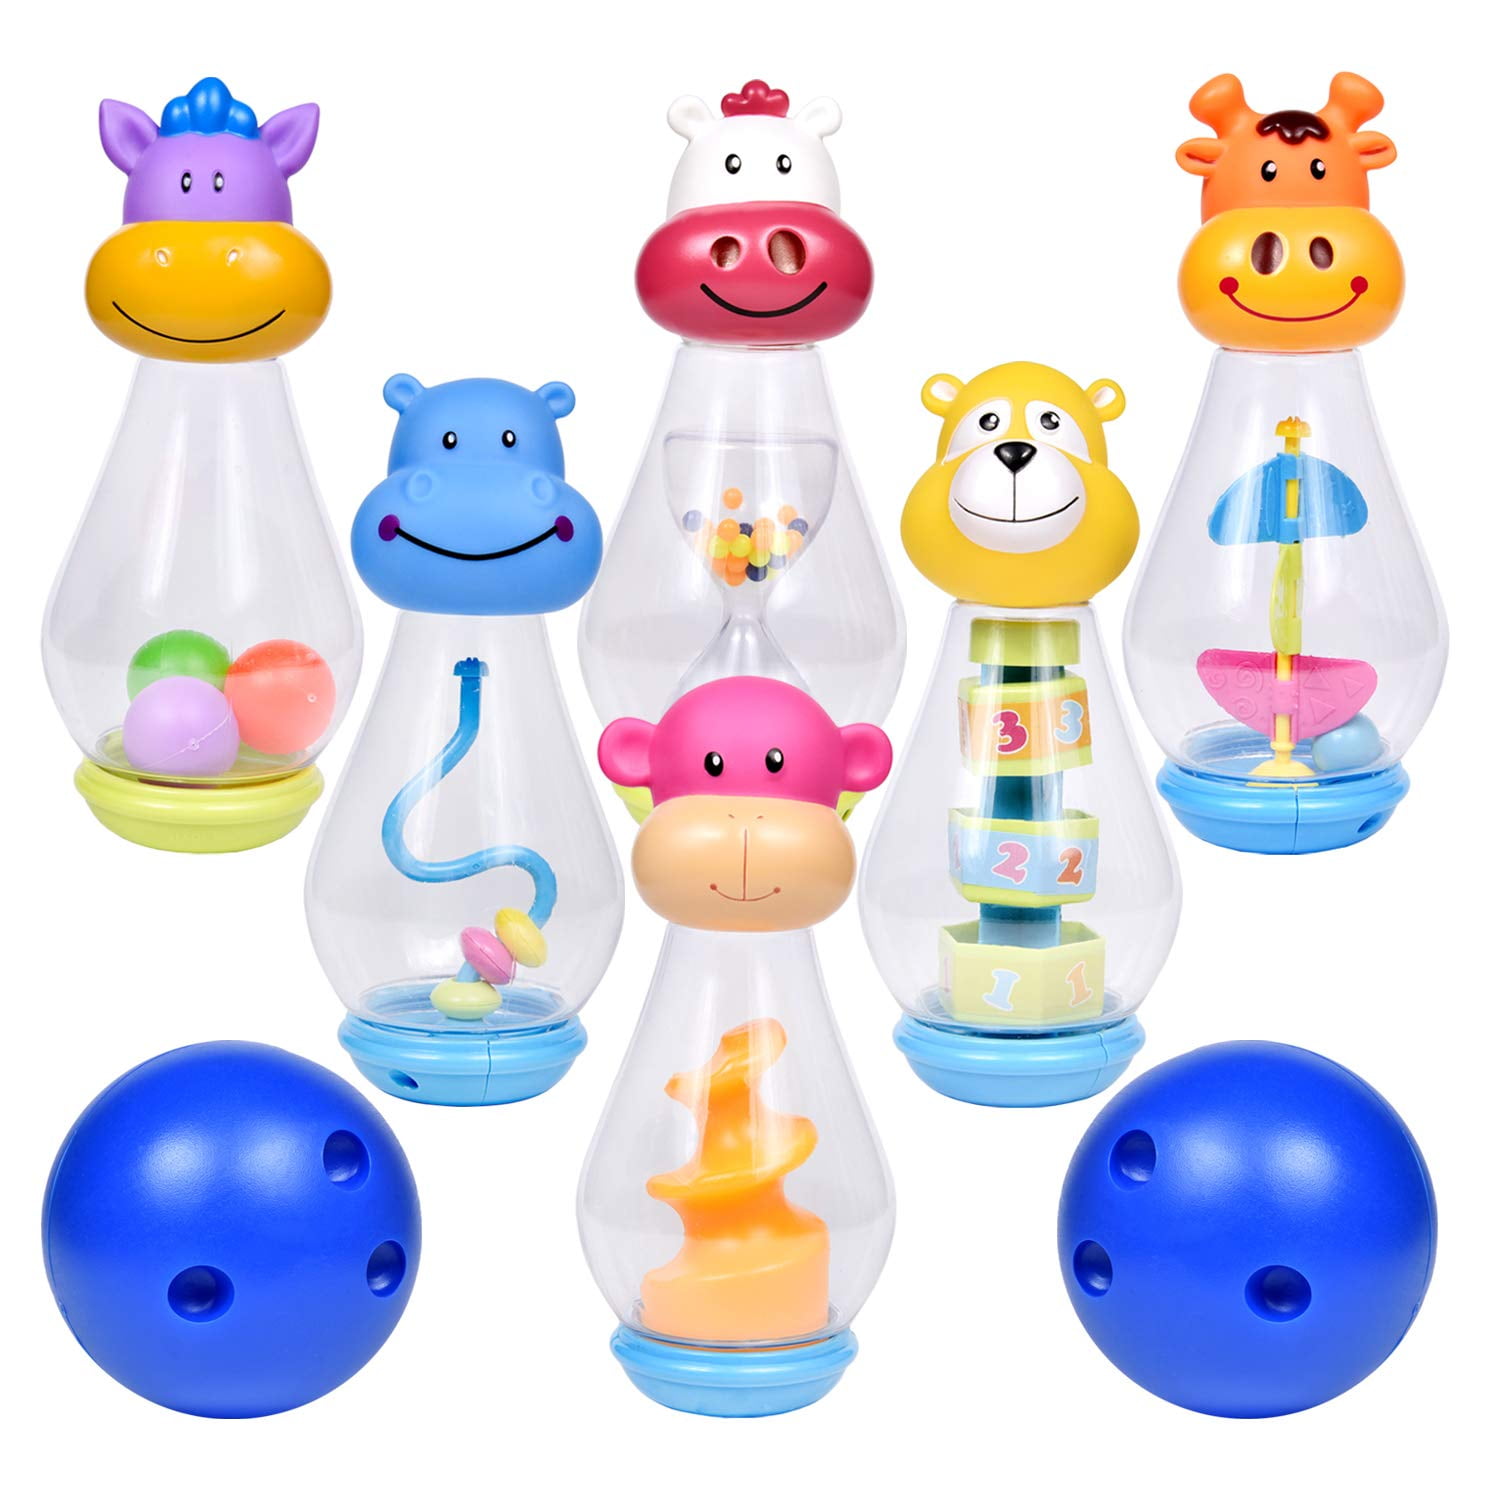 Kids Wooden Bowling Ball Toys Bowling Set for Kids with 6 Animal Head Bowling Pins &2 Bowling Balls Indoor and Outdoor Fun for Toddlers